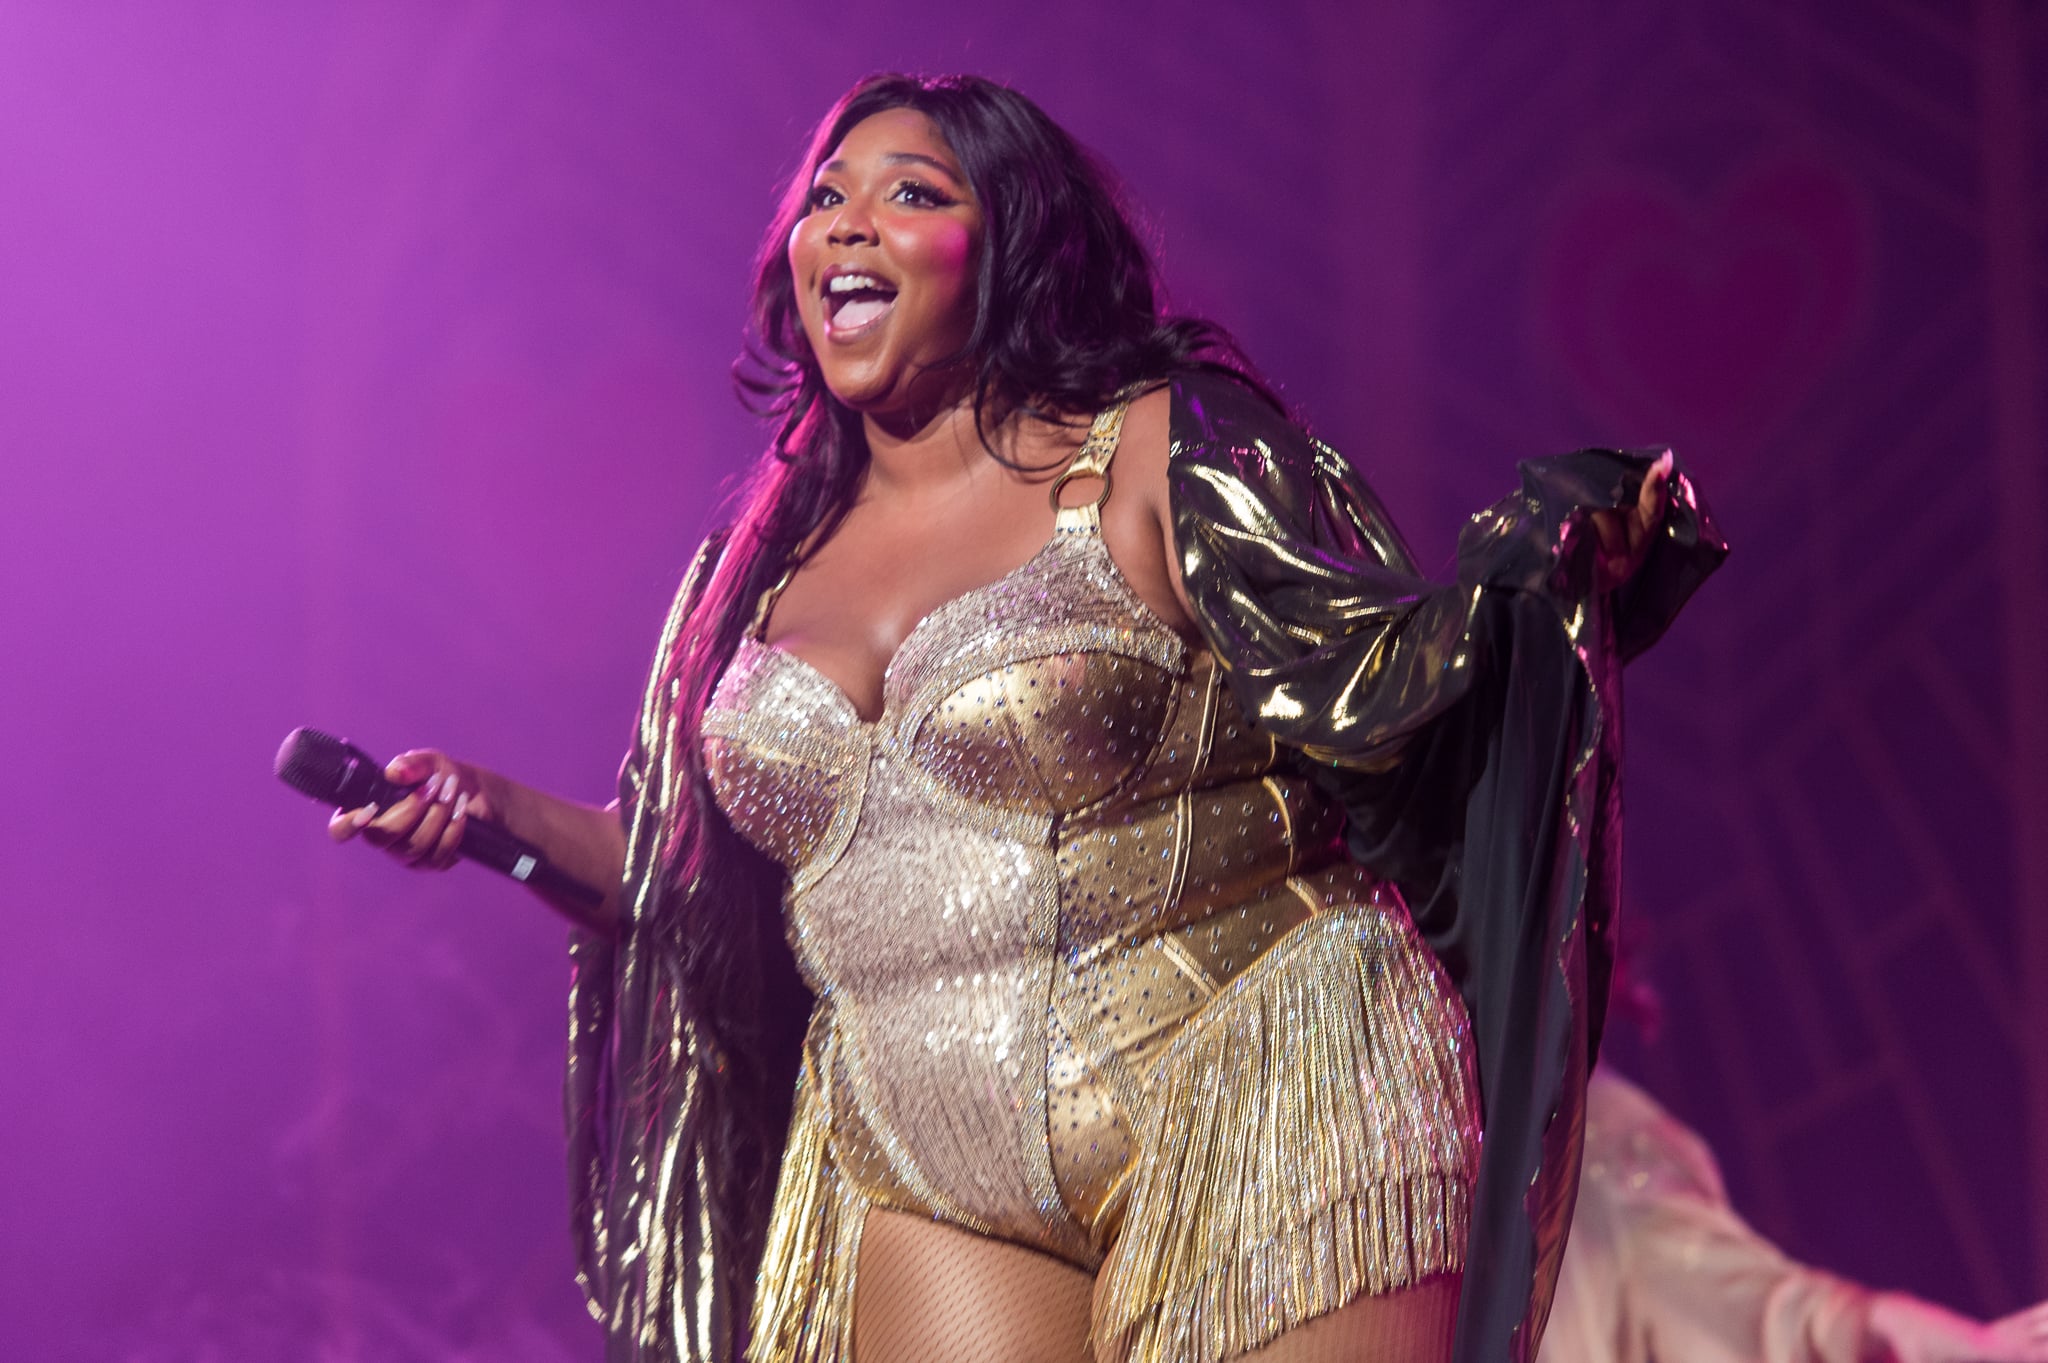 NEW YORK, NEW YORK - SEPTEMBER 22: Lizzo performs during her 'Cuz I Love You Too Tour' at Radio City Music Hall on September 22, 2019 in New York City. (Photo by Steven Ferdman/Getty Images)